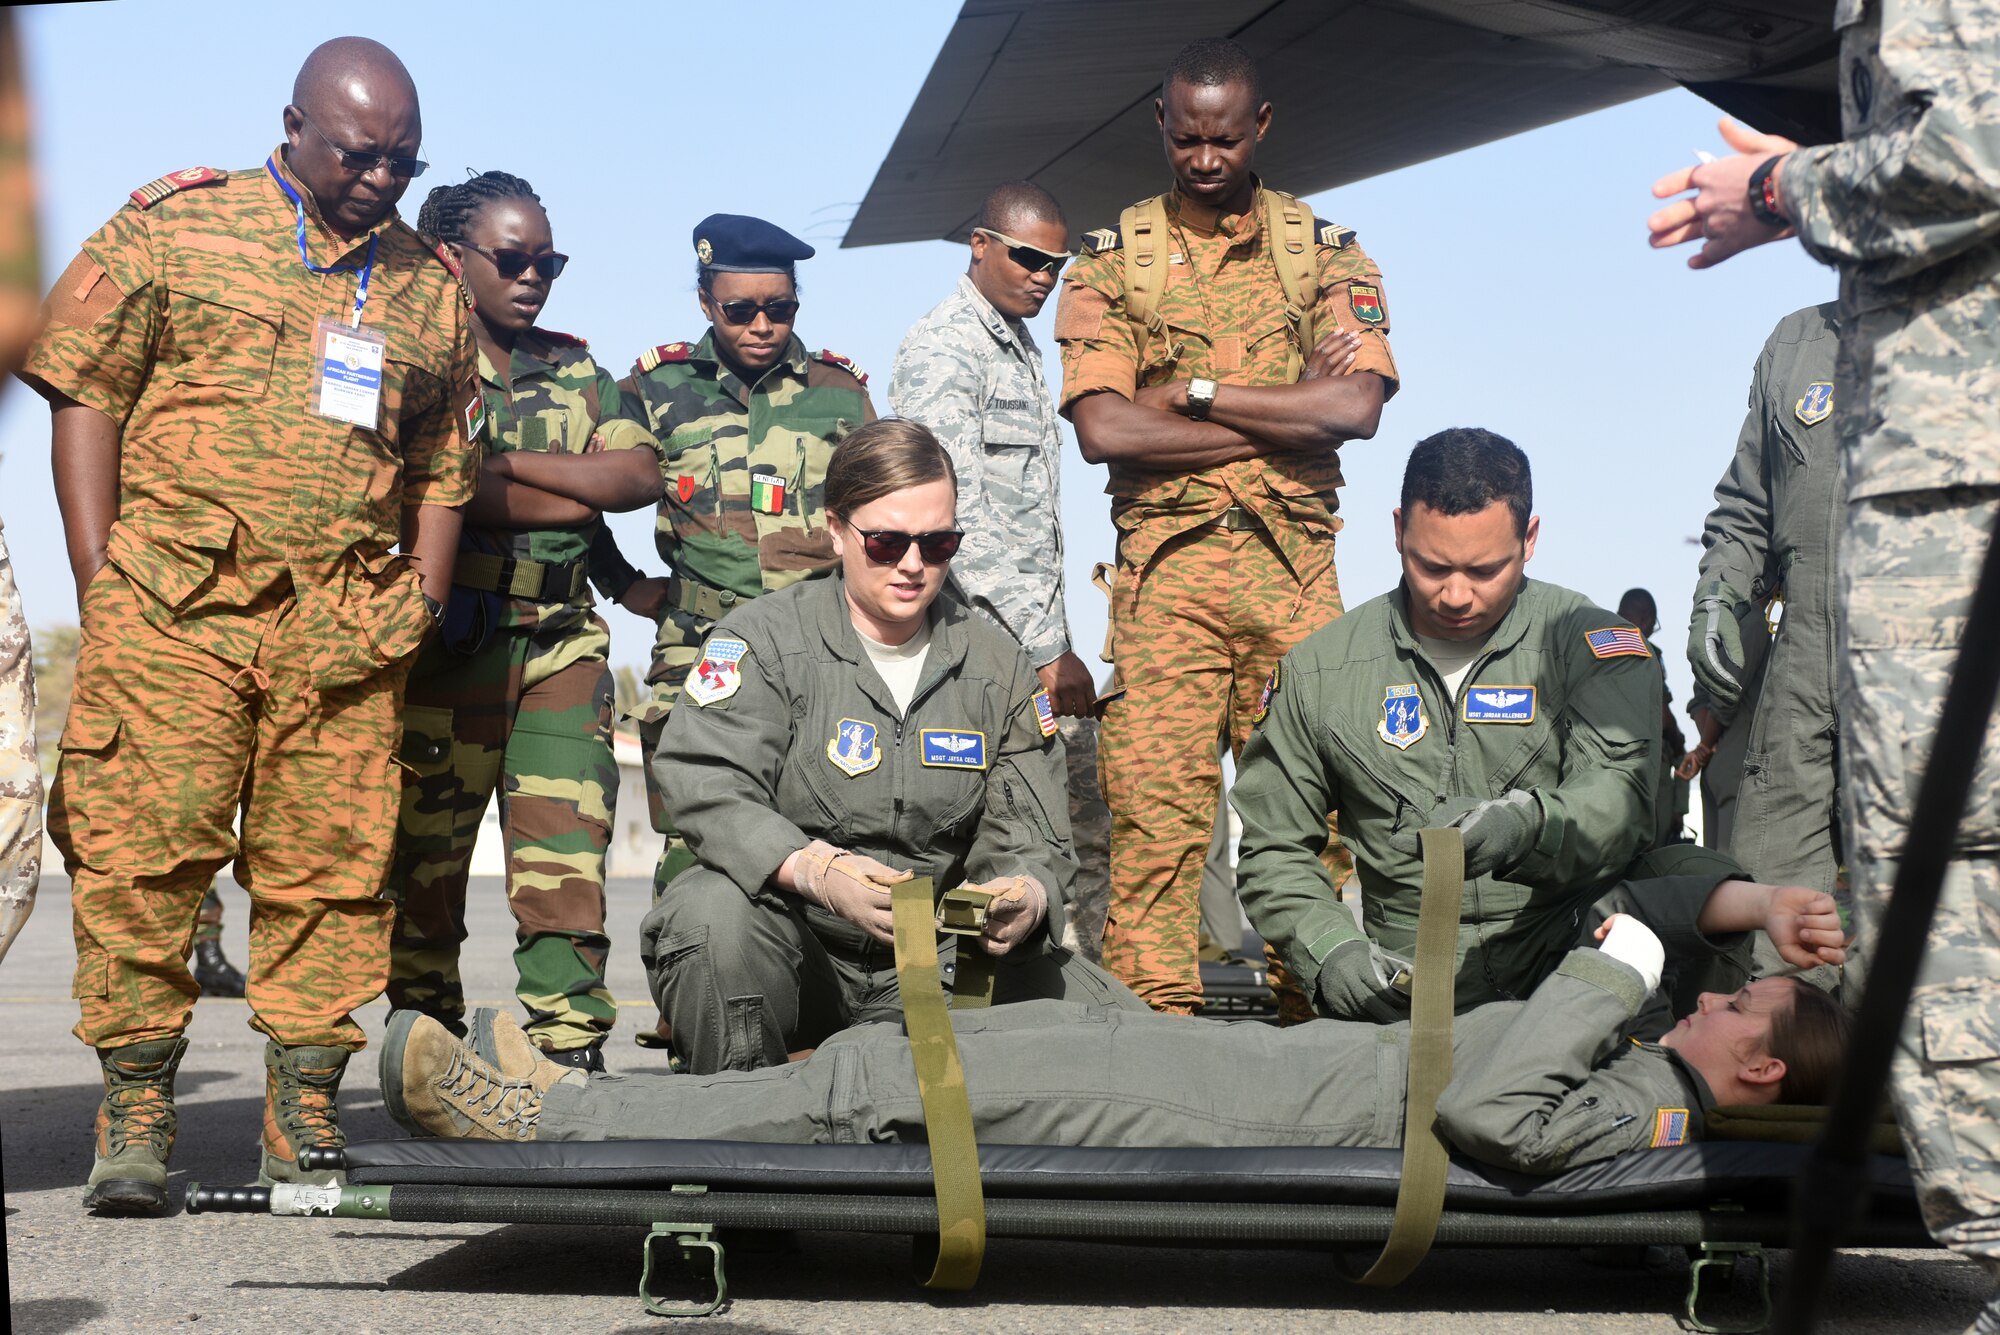 West Virginia Air National Guard medical technicians, assigned to the 167th Aeromedical Evacuation Squadron, demonstrate how to load a patient onto a litter at Captain Andalla Cissé Air Base, Senegal, March 22, 2018. The demonstration was part of African Partnership Flight Senegal, an event co-hosted by the U.S. and Senegal that focuses on the exchange of knowledge in the aeromedical and casualty evacuation fields, as well as air and ground safety. (U.S. Air Force photo by Airman 1st Class Eli Chevalier)